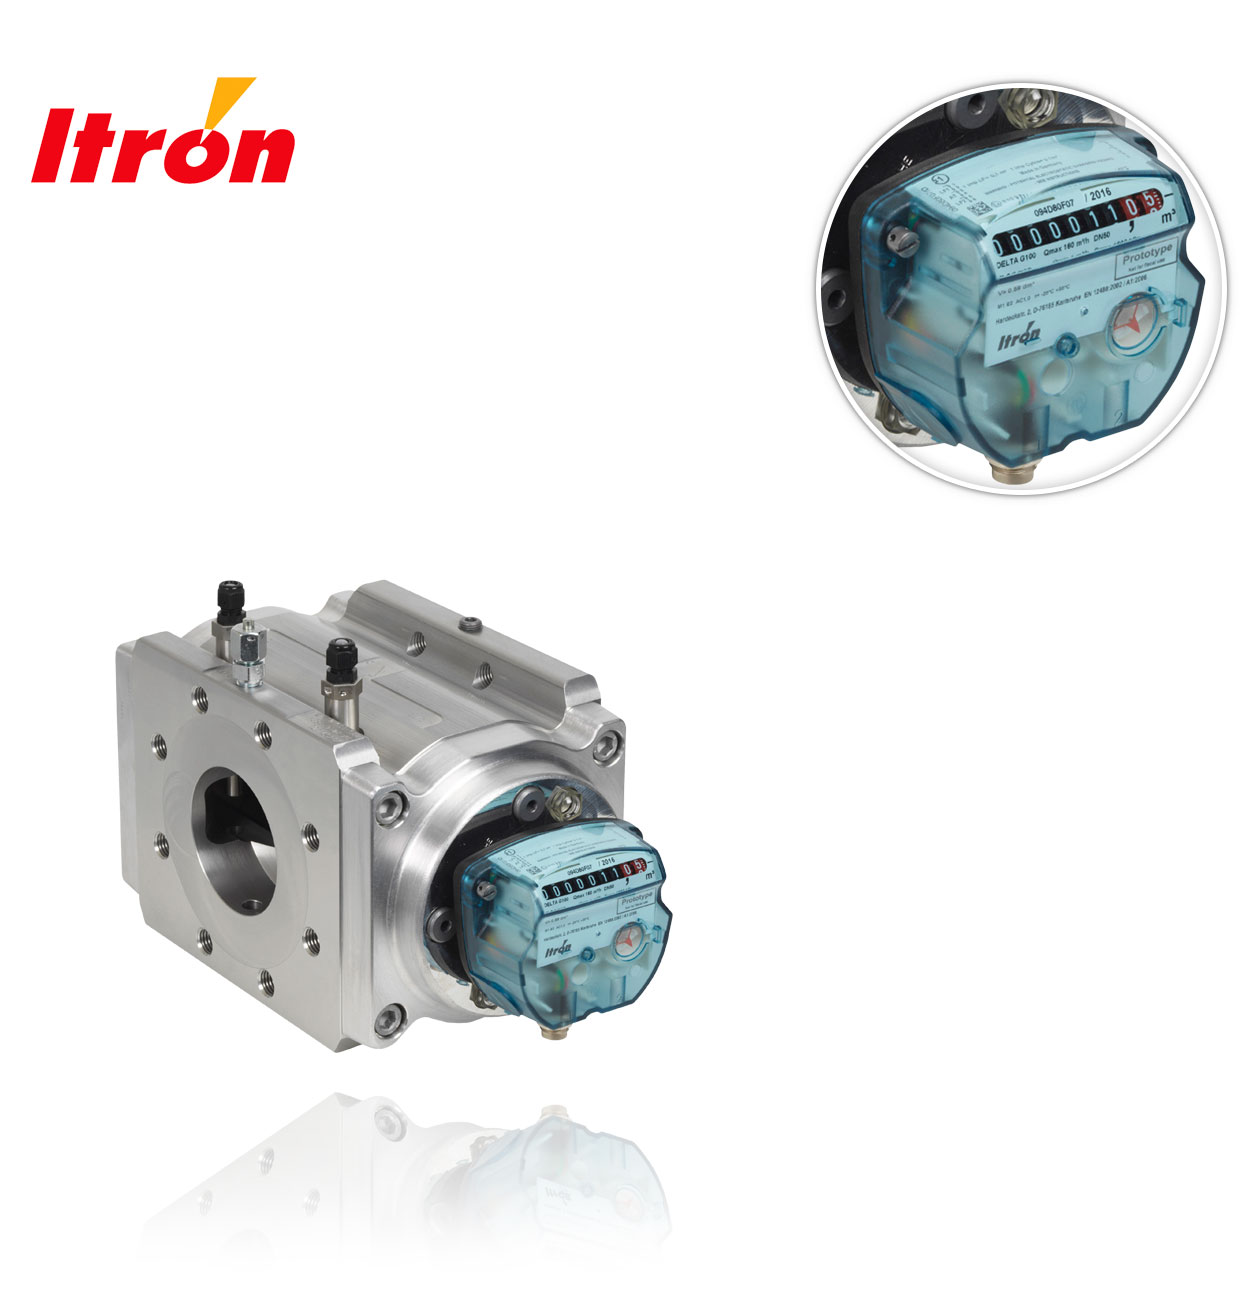 DELTA G160 DN80 maximum qty:250 DYNAMIC:160 LENGTH:241mm ITRON EXTENDED DYNAMIC ROTARY PISTON METER